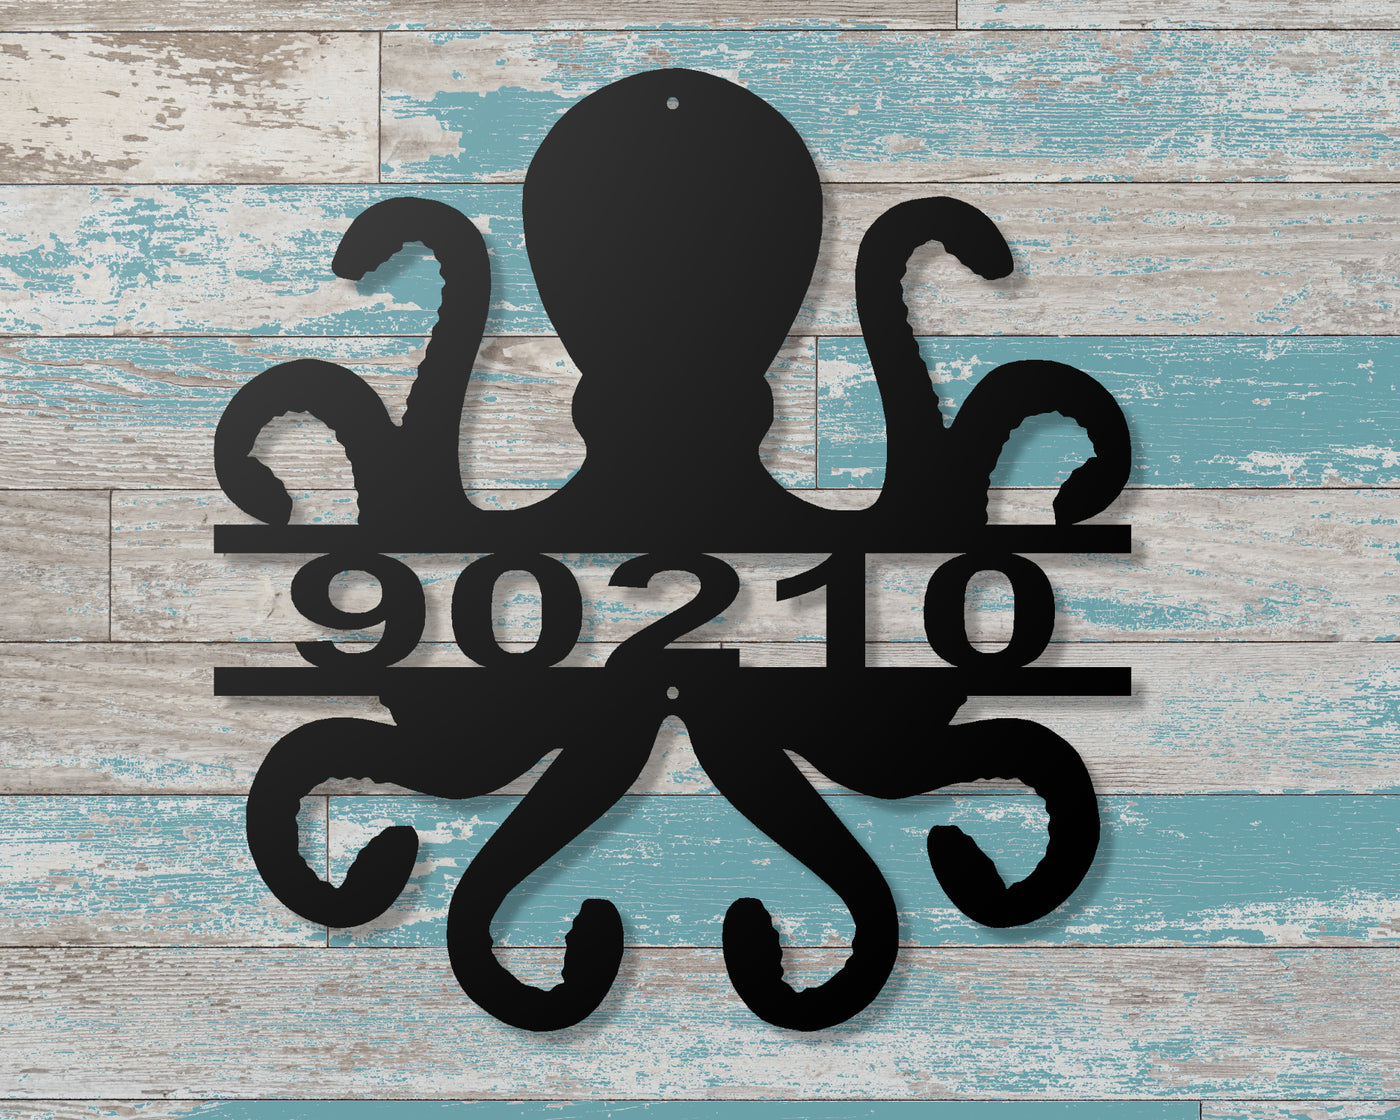 Personalized Octopus Metal Sign with Name or Street Address Numbers - Madison Iron and Wood - Personalized sign - metal outdoor decor - Steel deocrations - american made products - veteran owned business products - fencing decorations - fencing supplies - custom wall decorations - personalized wall signs - steel - decorative post caps - steel post caps - metal post caps - brackets - structural brackets - home improvement - easter - easter decorations - easter gift - easter yard decor